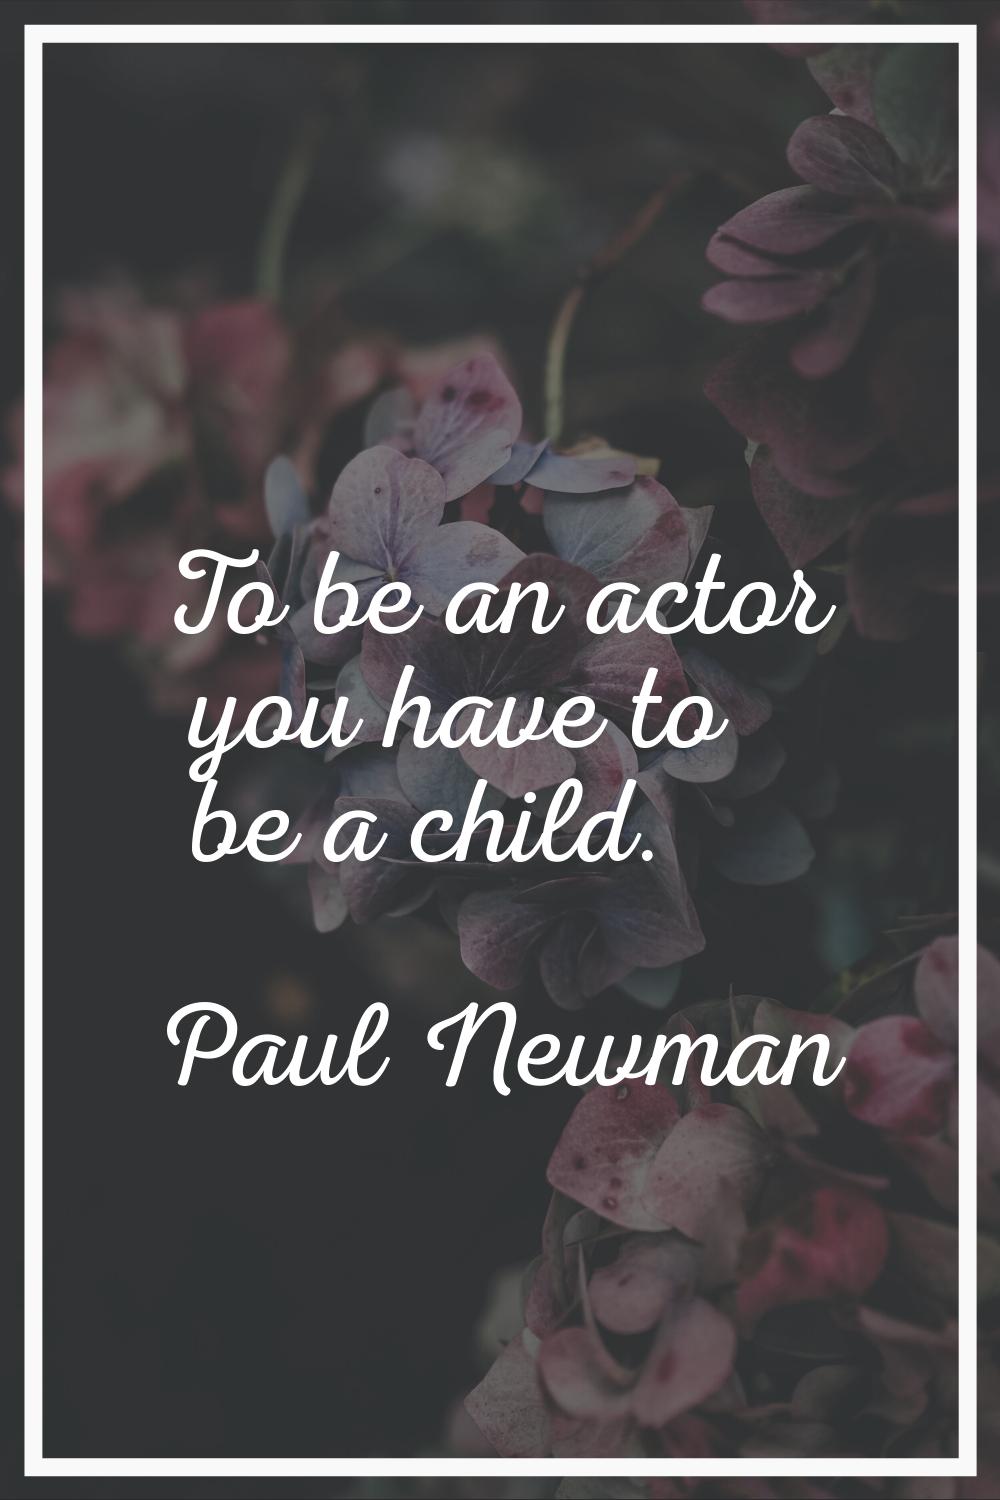 To be an actor you have to be a child.